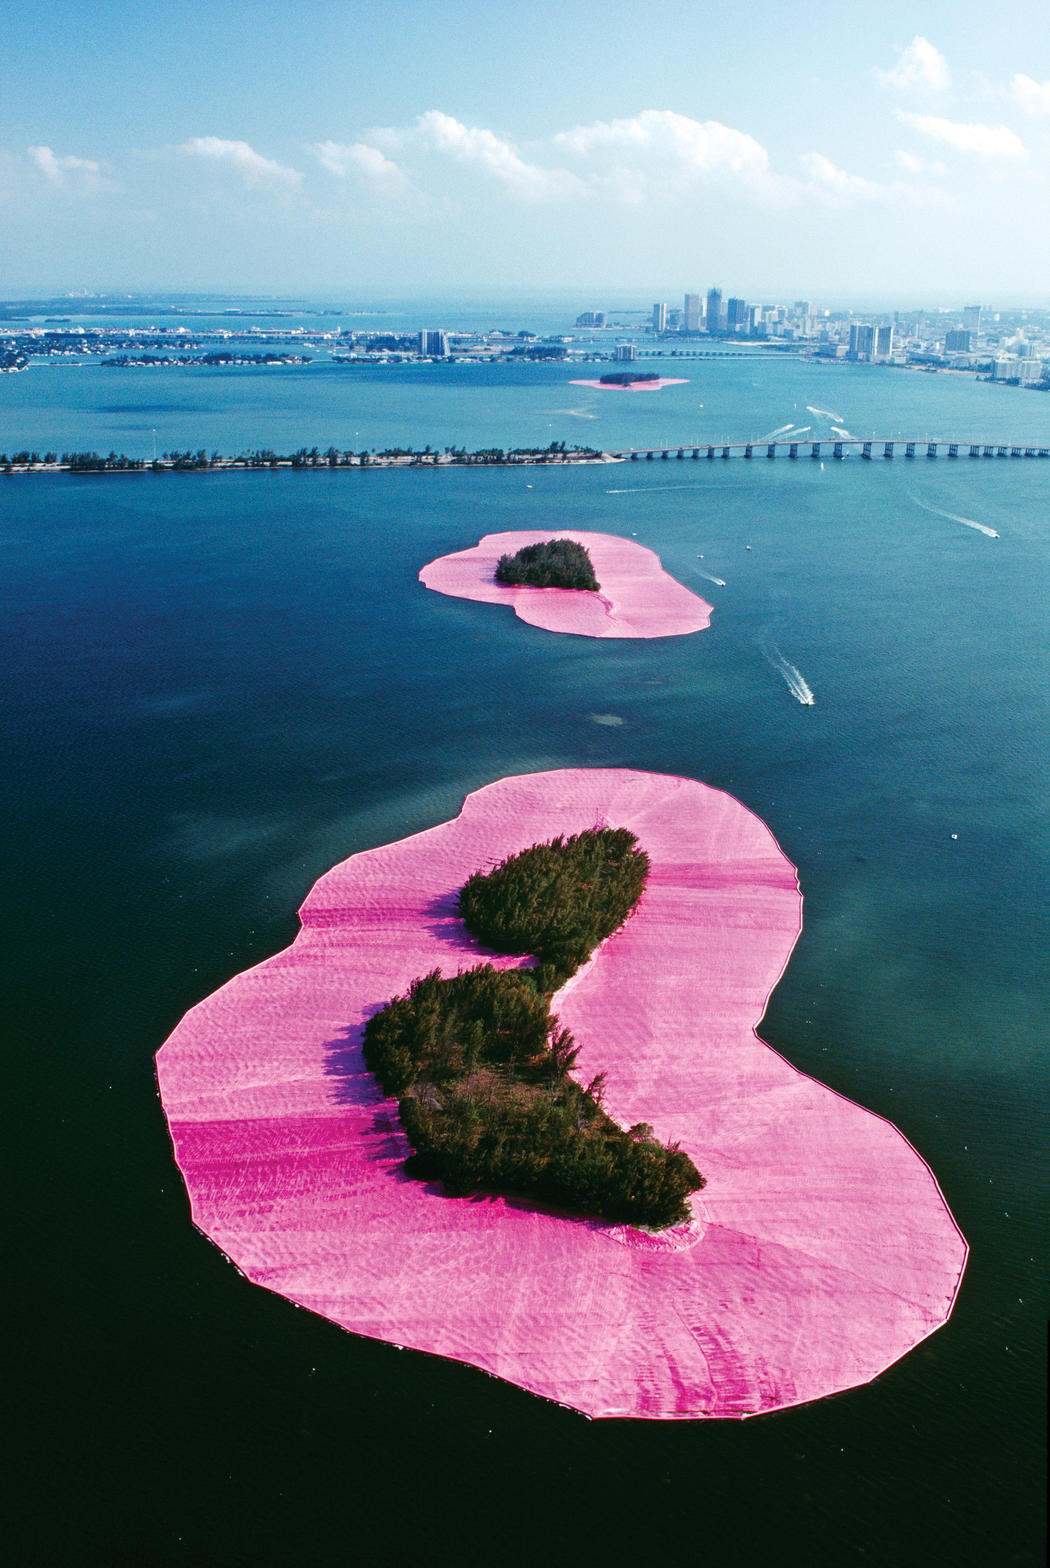 Christo 'wrapped' islands in Florida